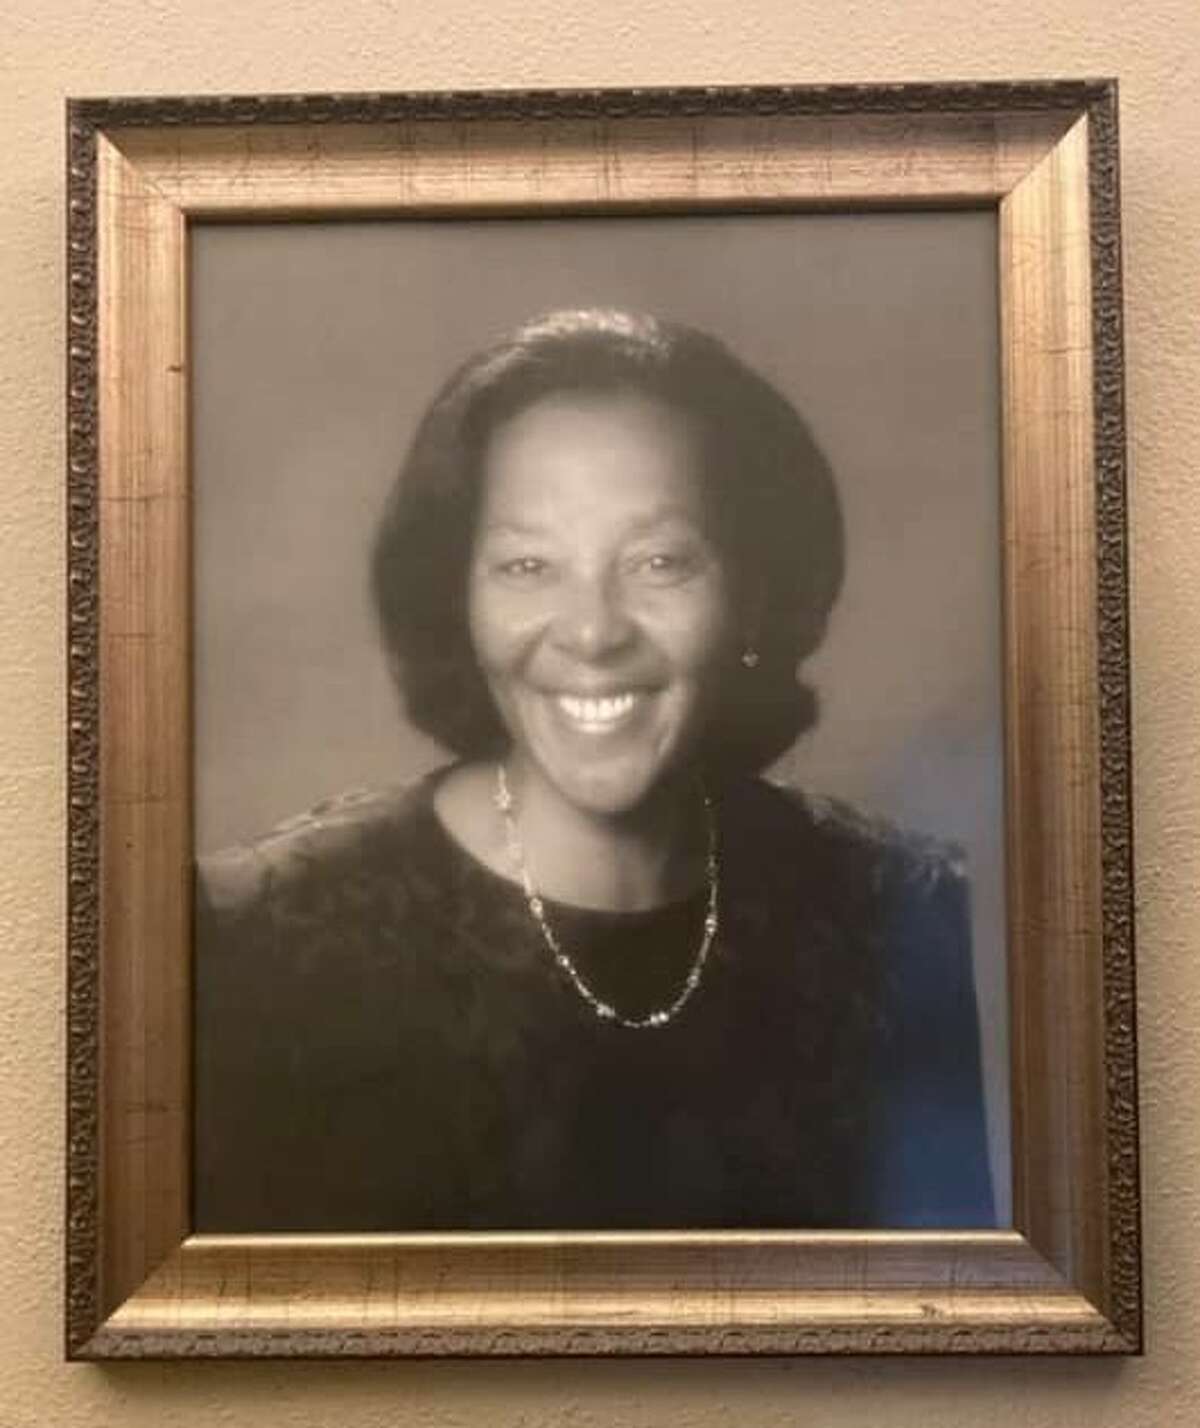 Jo Long served as Executive Director of San Antonio's Carver Community Cultural Center from 1979 to her retirement in 2000. 